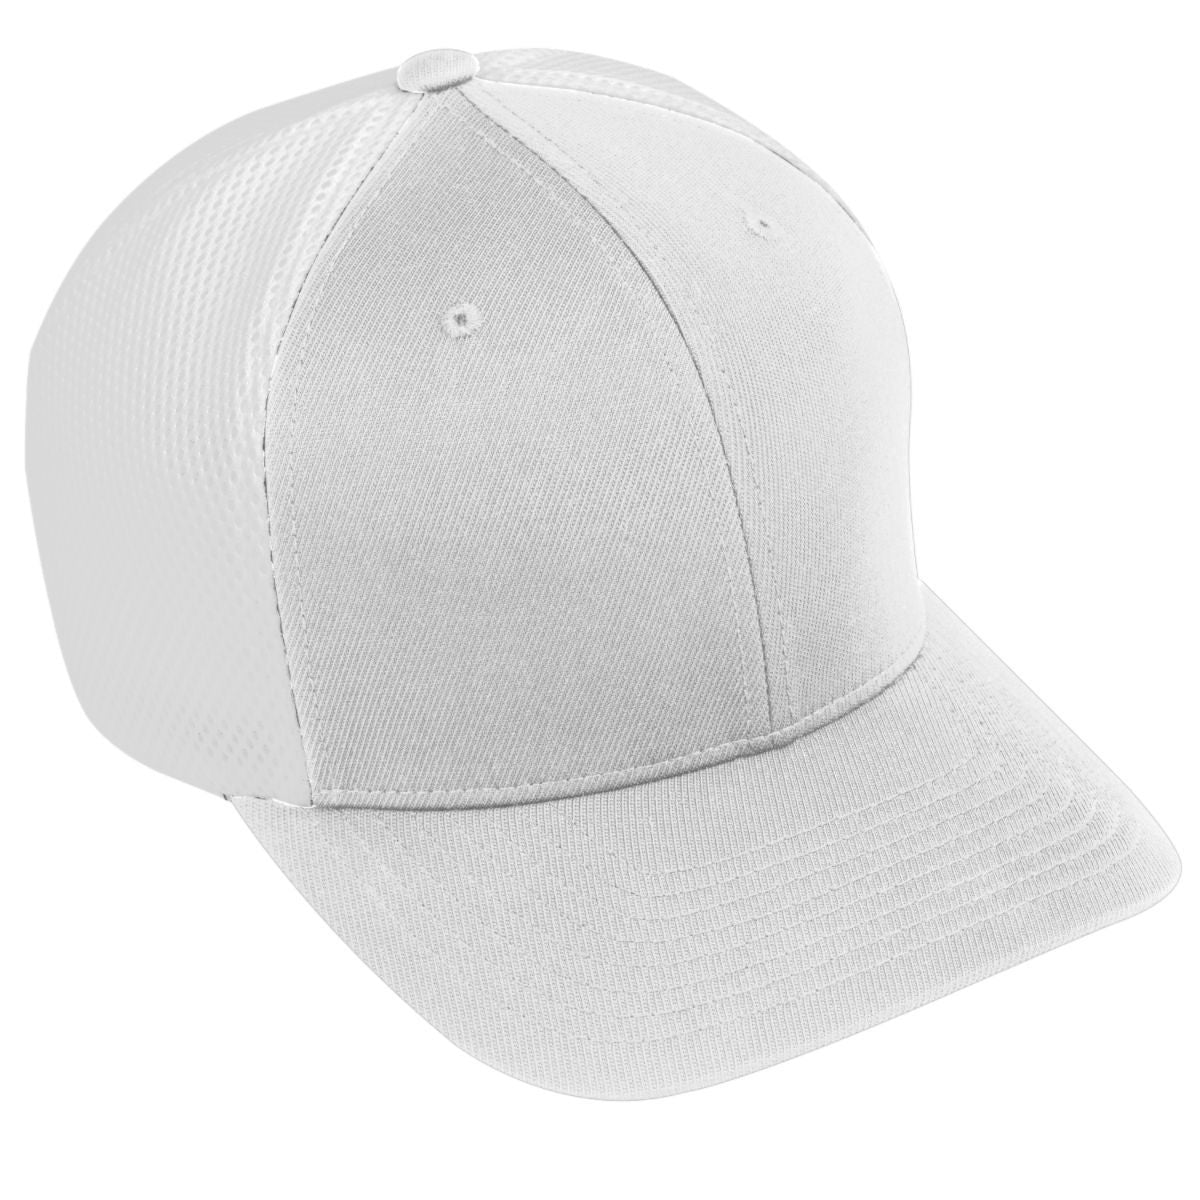 Augusta Sportswear Flexfit Vapor Cap in White/White  -Part of the Adult, Augusta-Products, Headwear, Headwear-Cap product lines at KanaleyCreations.com